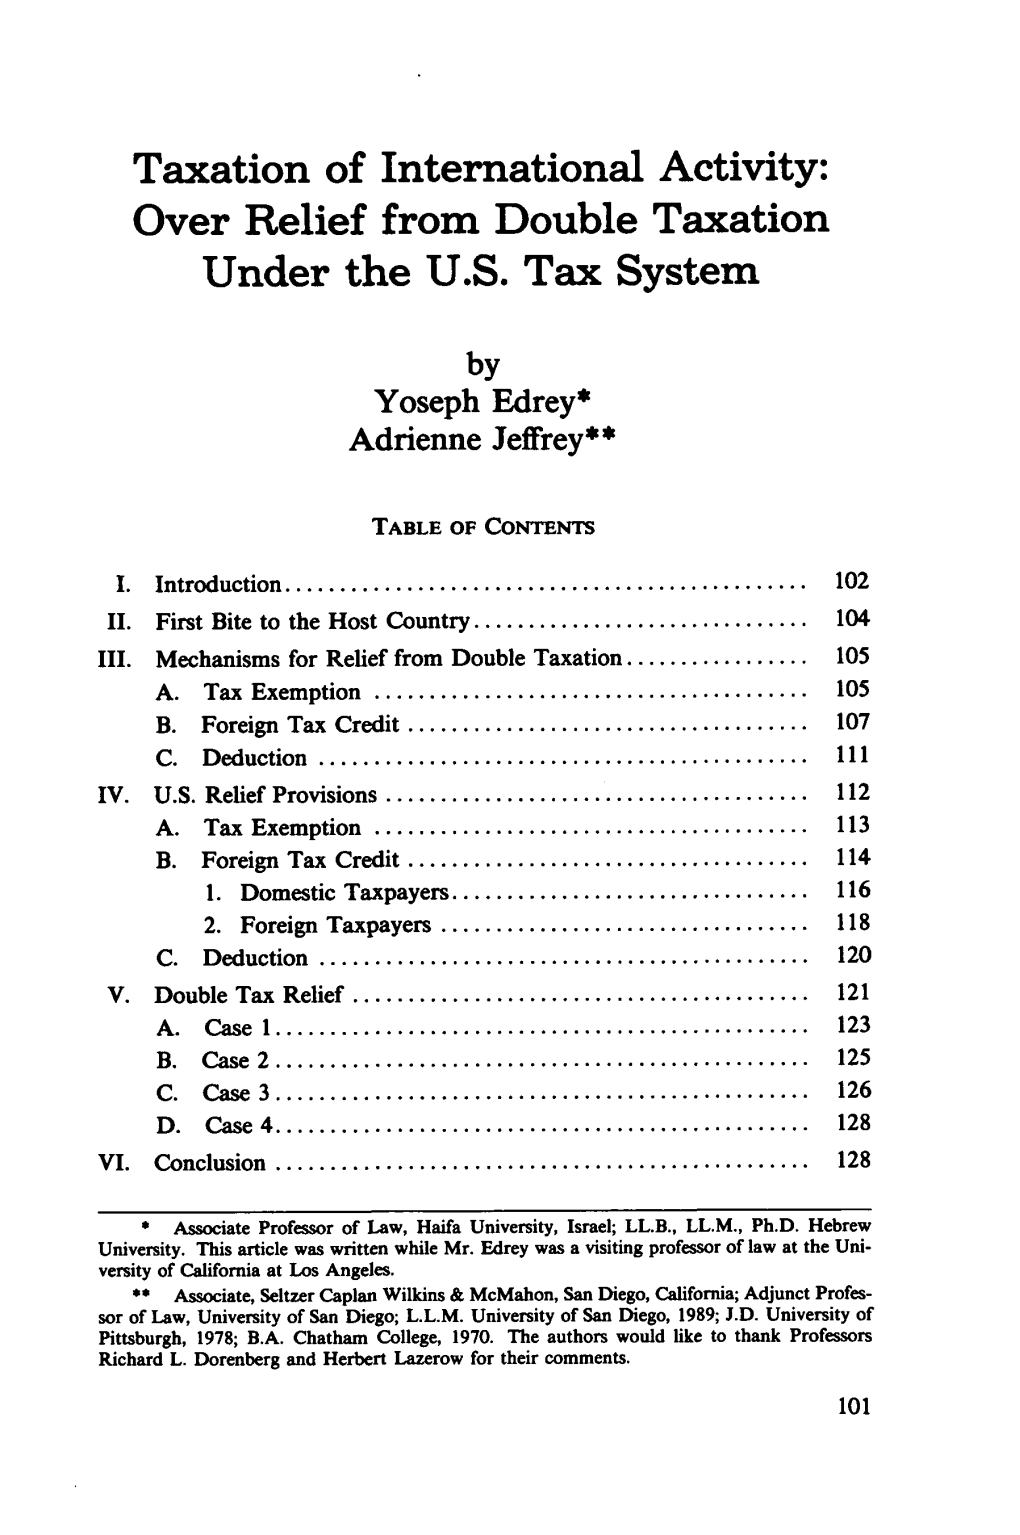 Taxation of International Activity: Over Relief from Double Taxation Under the U.S